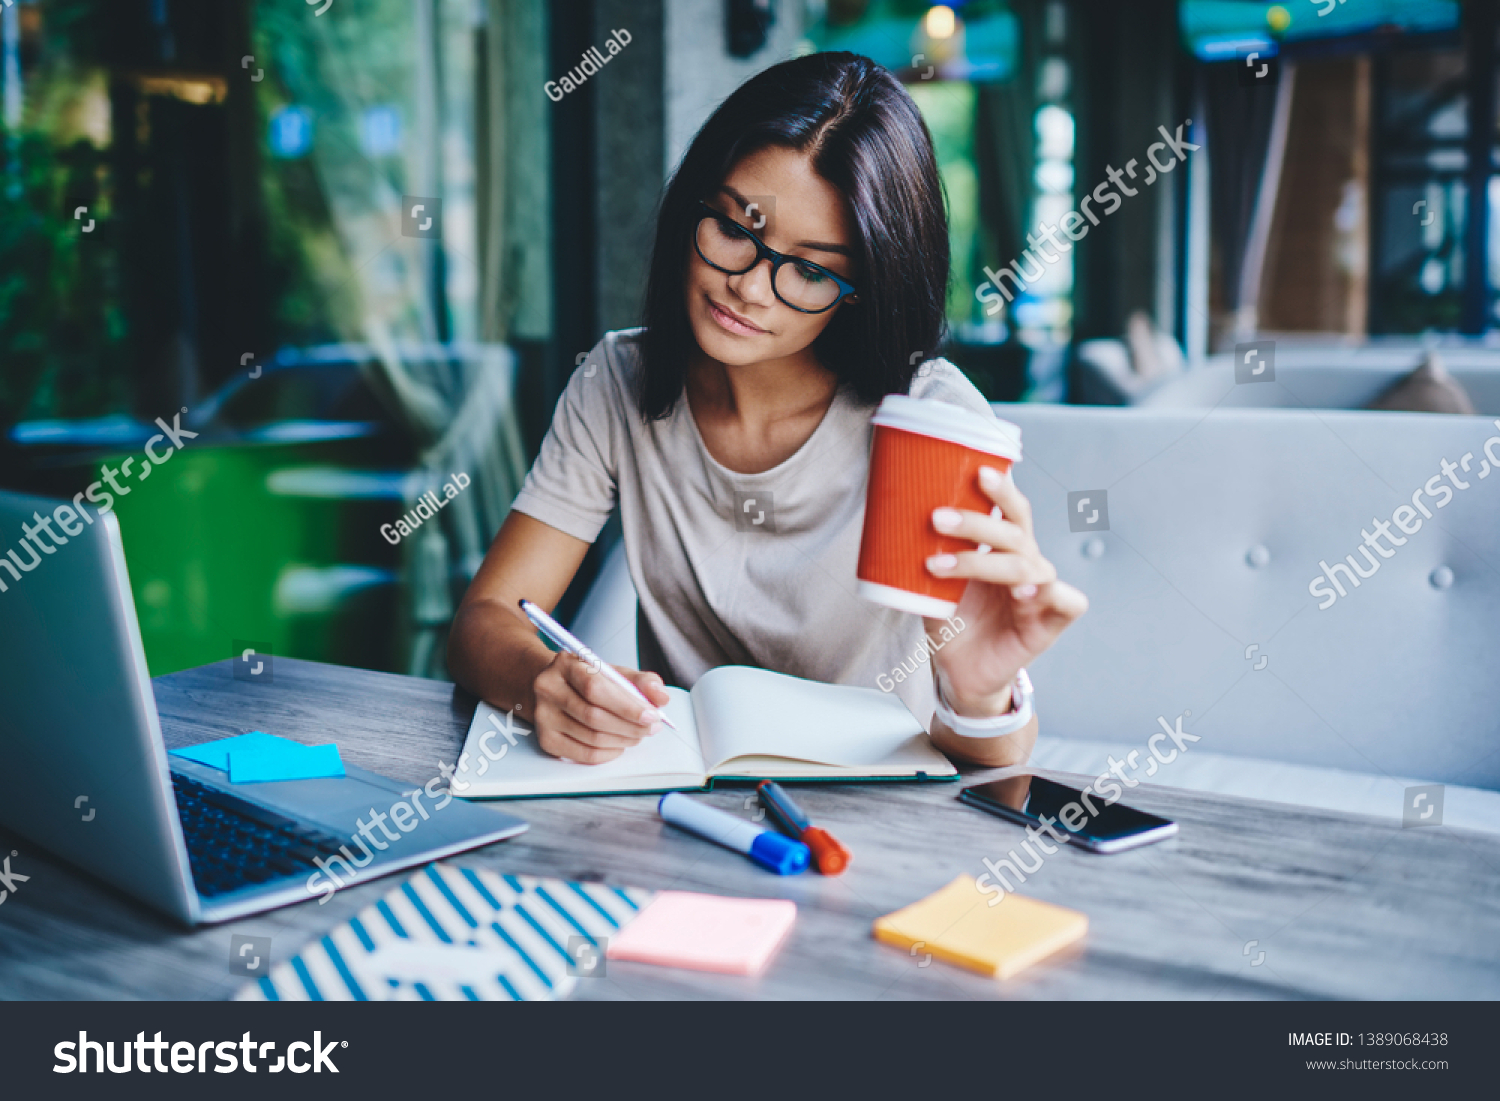 Concentrated female student writing in notebook while learning with cardboard coffee cup in cafe, pensive woman freelancer noting information for planning project doing remote job via laptop computer #1389068438